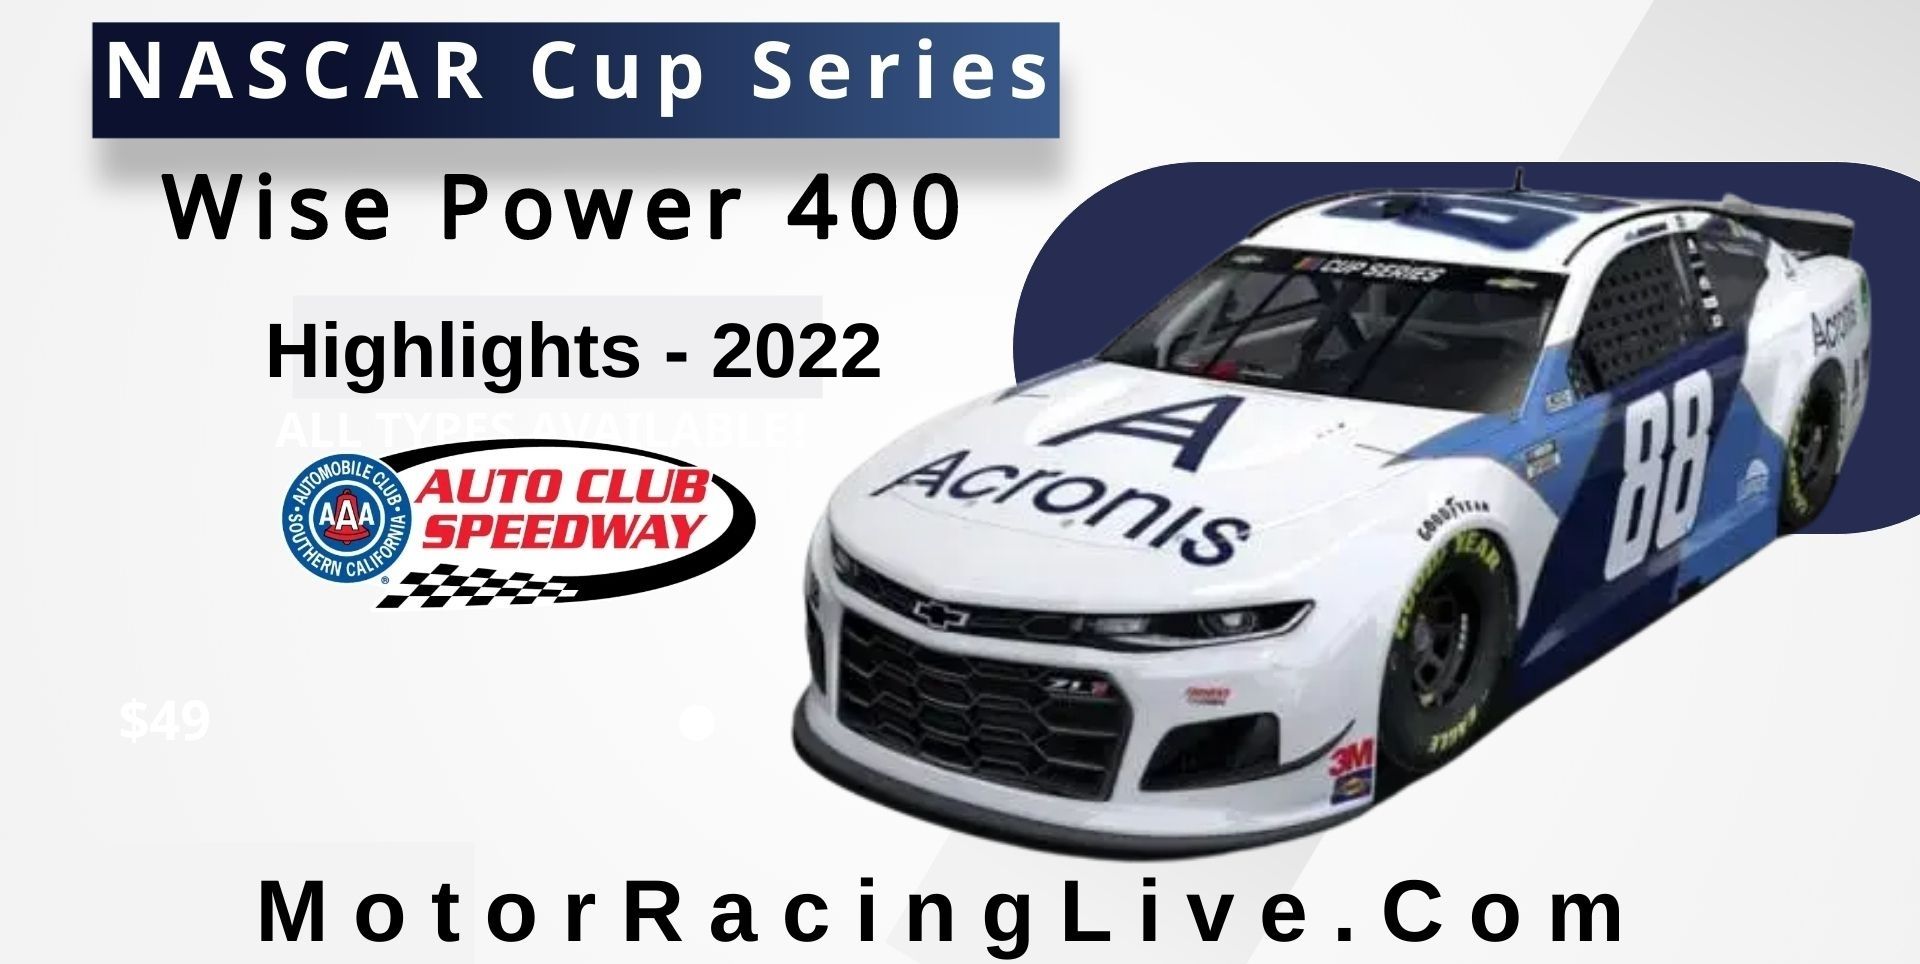 Wise Power 400 Highlights 2022 NASCAR Cup Series